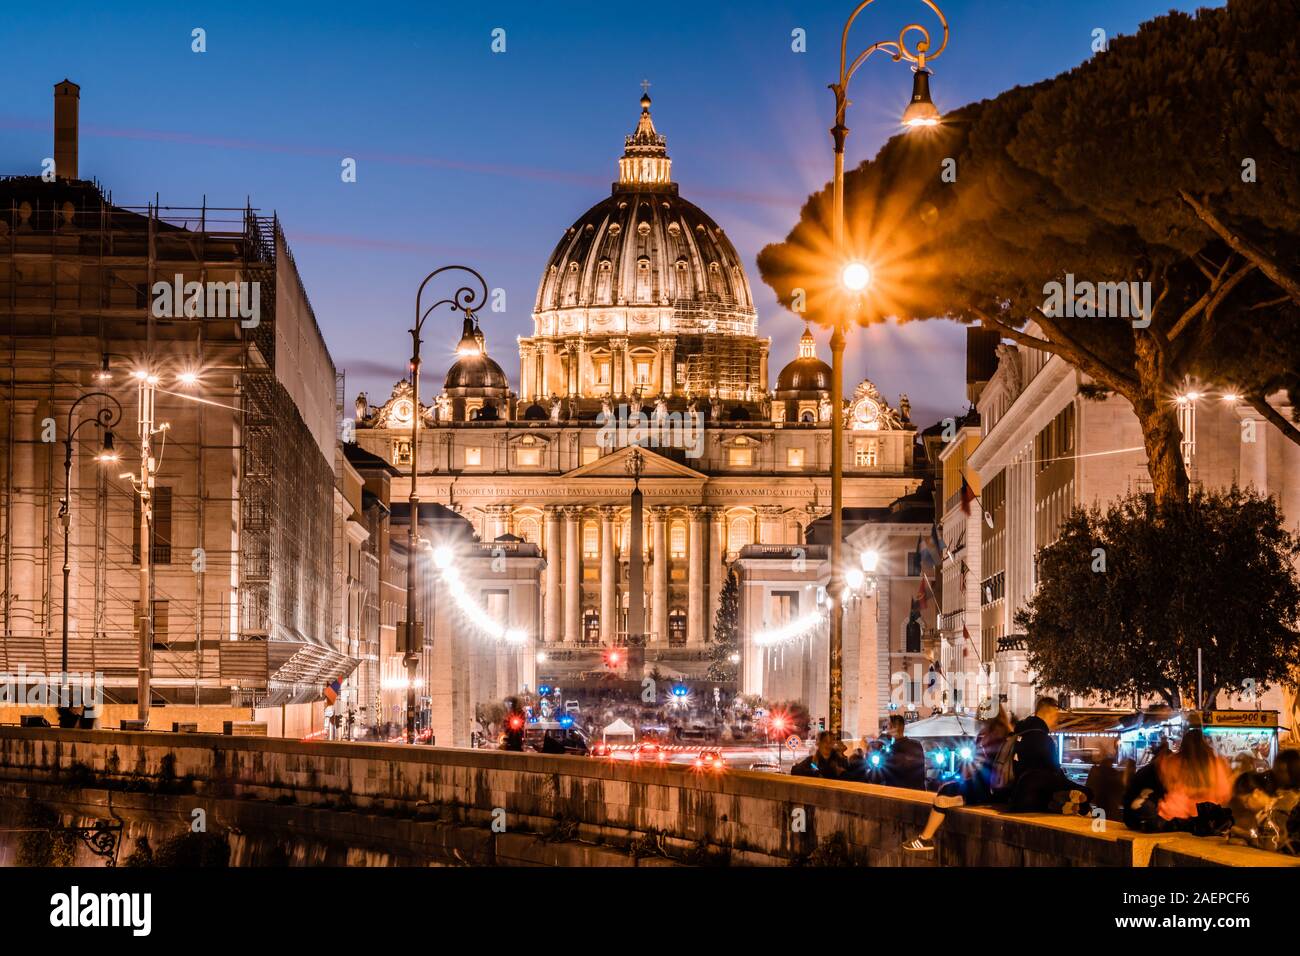 St Peters basilica in Vatican City, Rome Italy Stock Photo